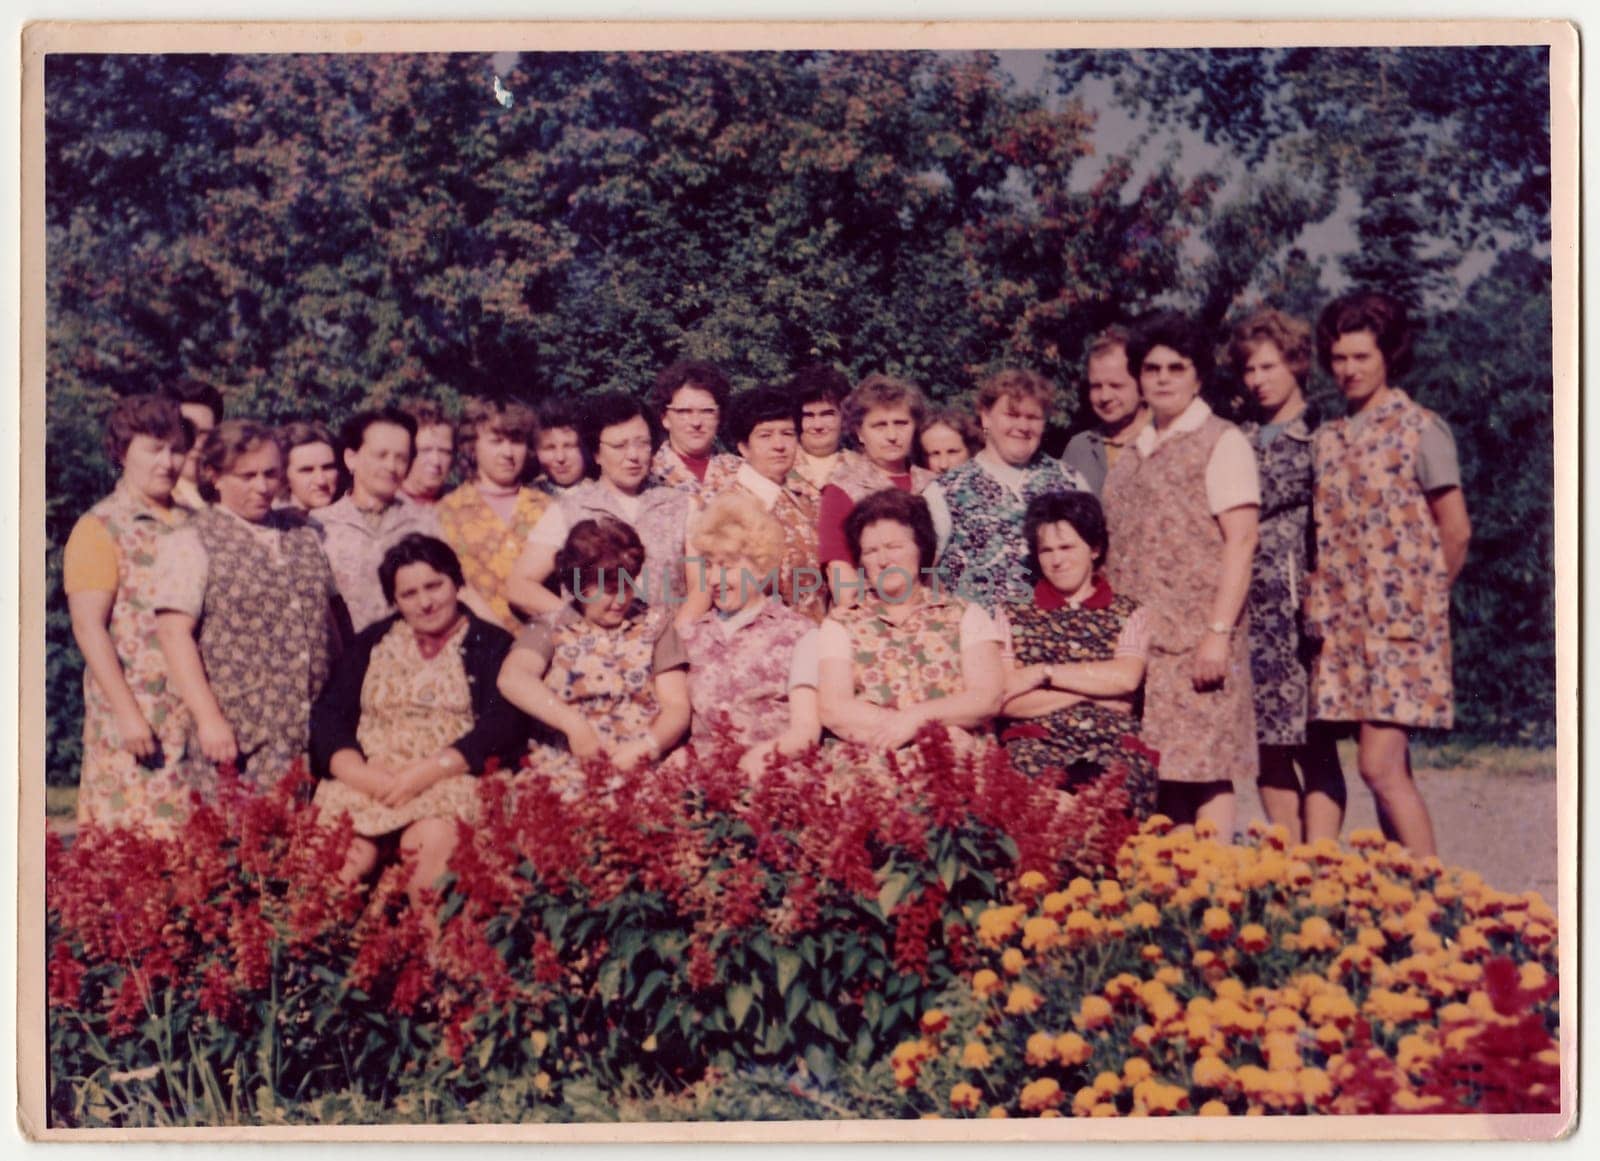 Vintage photo shows women pose at the horticulture. by roman_nerud